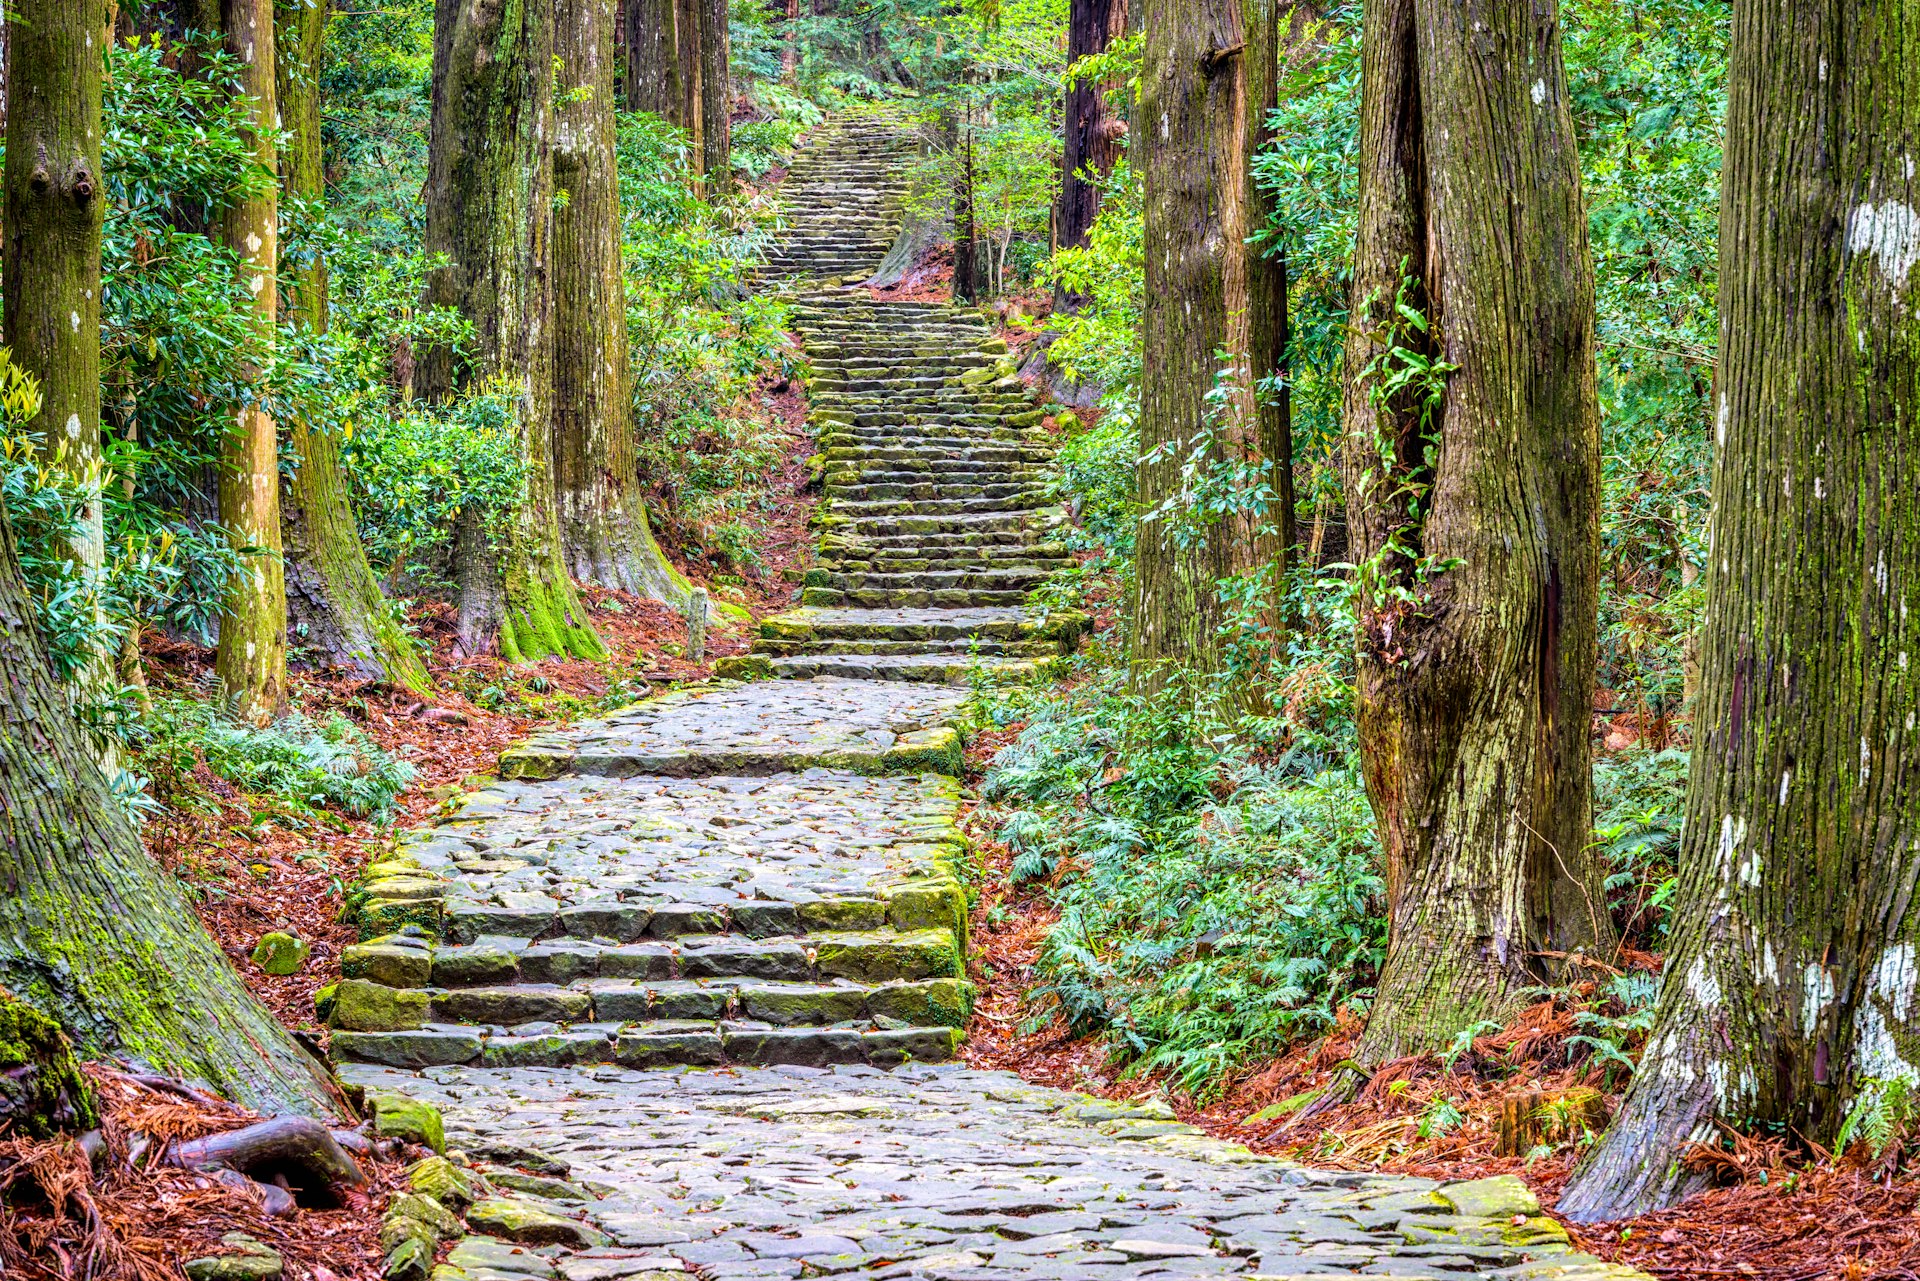 A path, made up of a series of wide stone steps, weaves through dense forest 